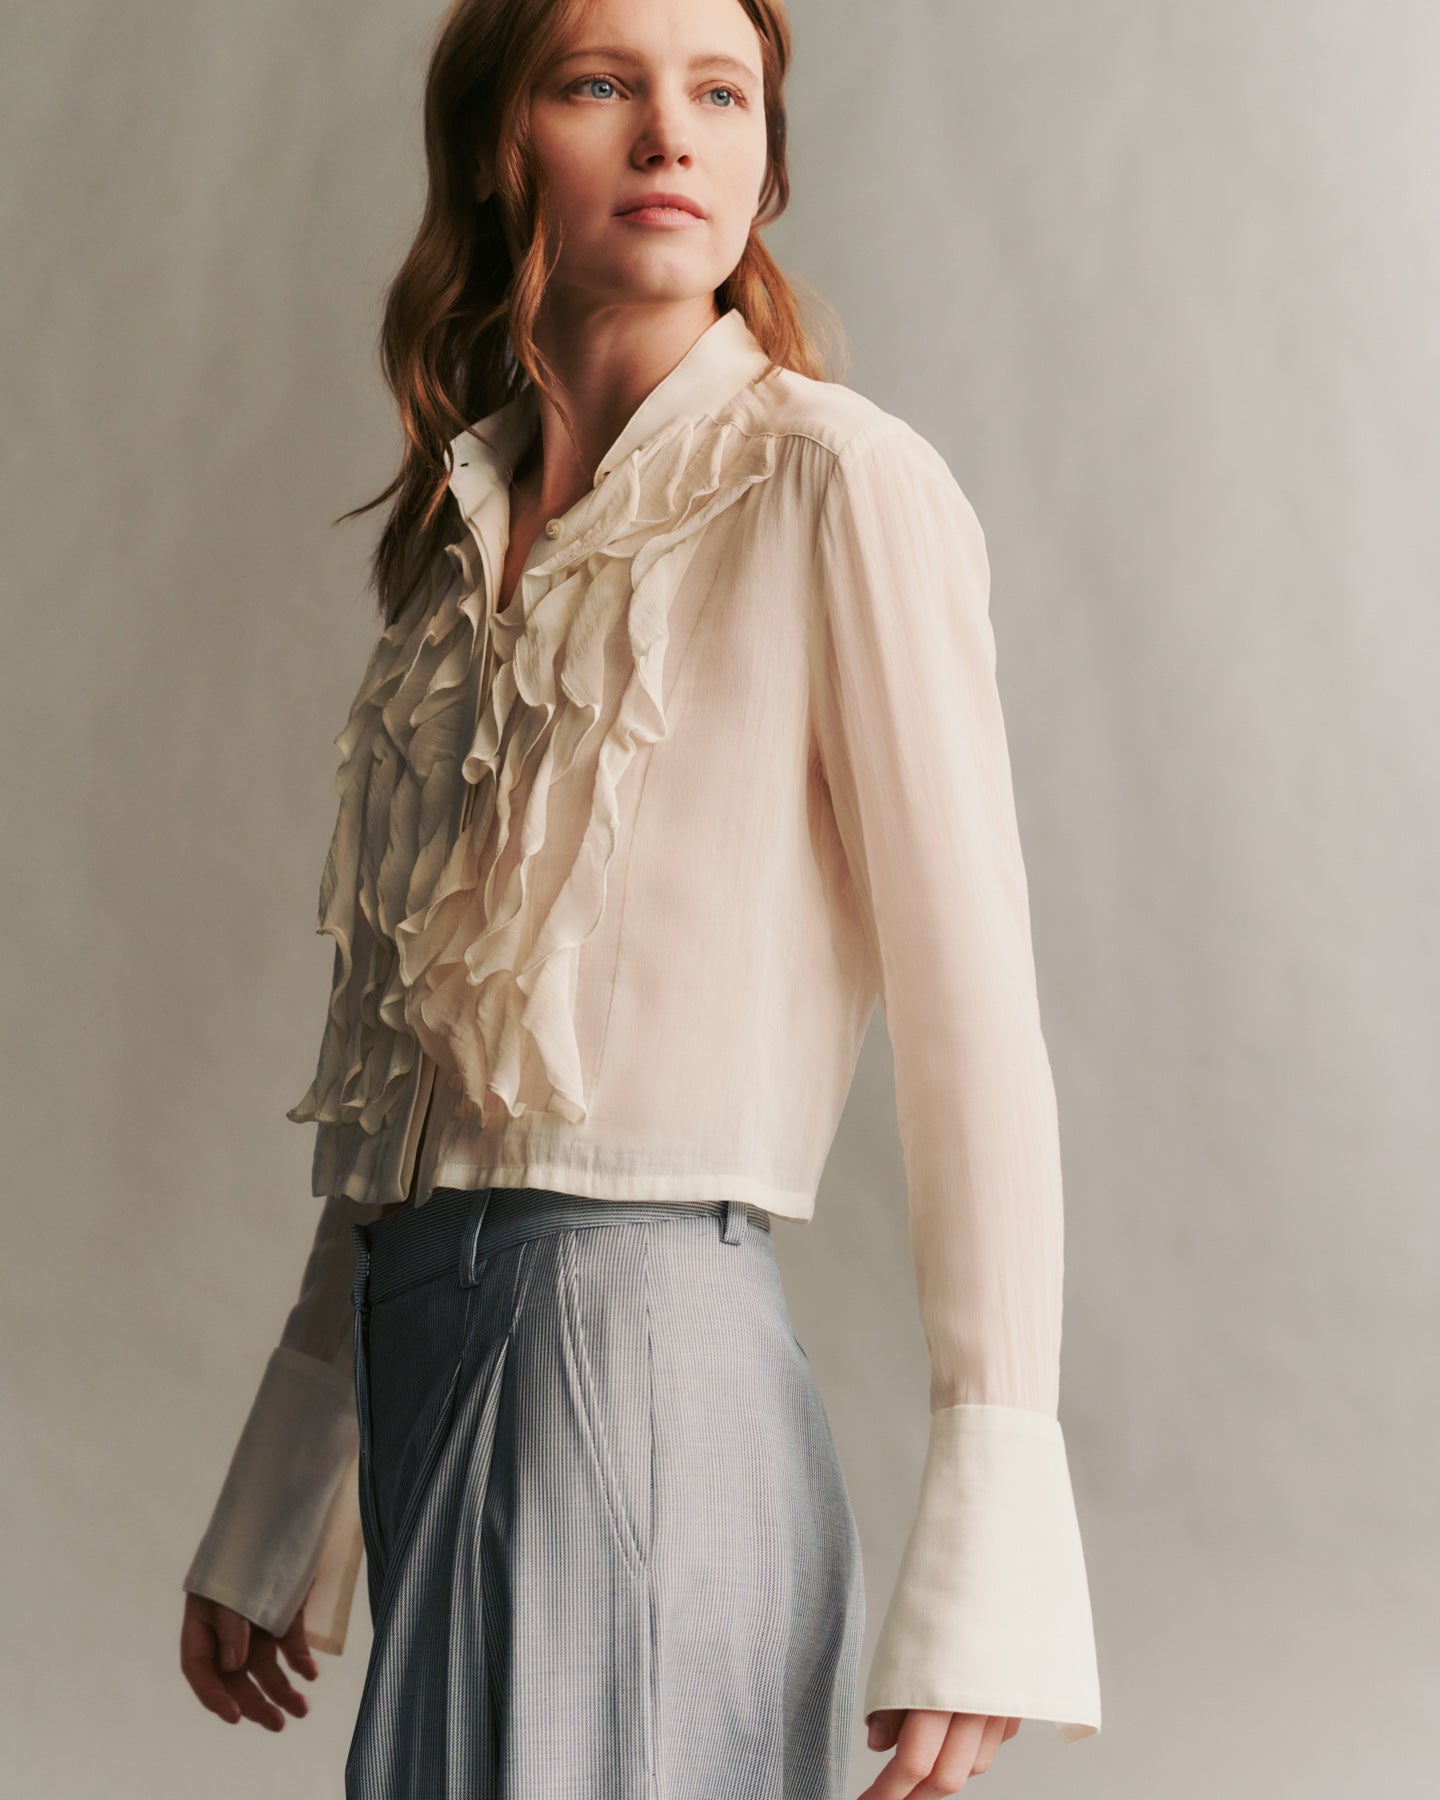 TWP Ivory Patti shirt in crinkled silk cotton voile view 4